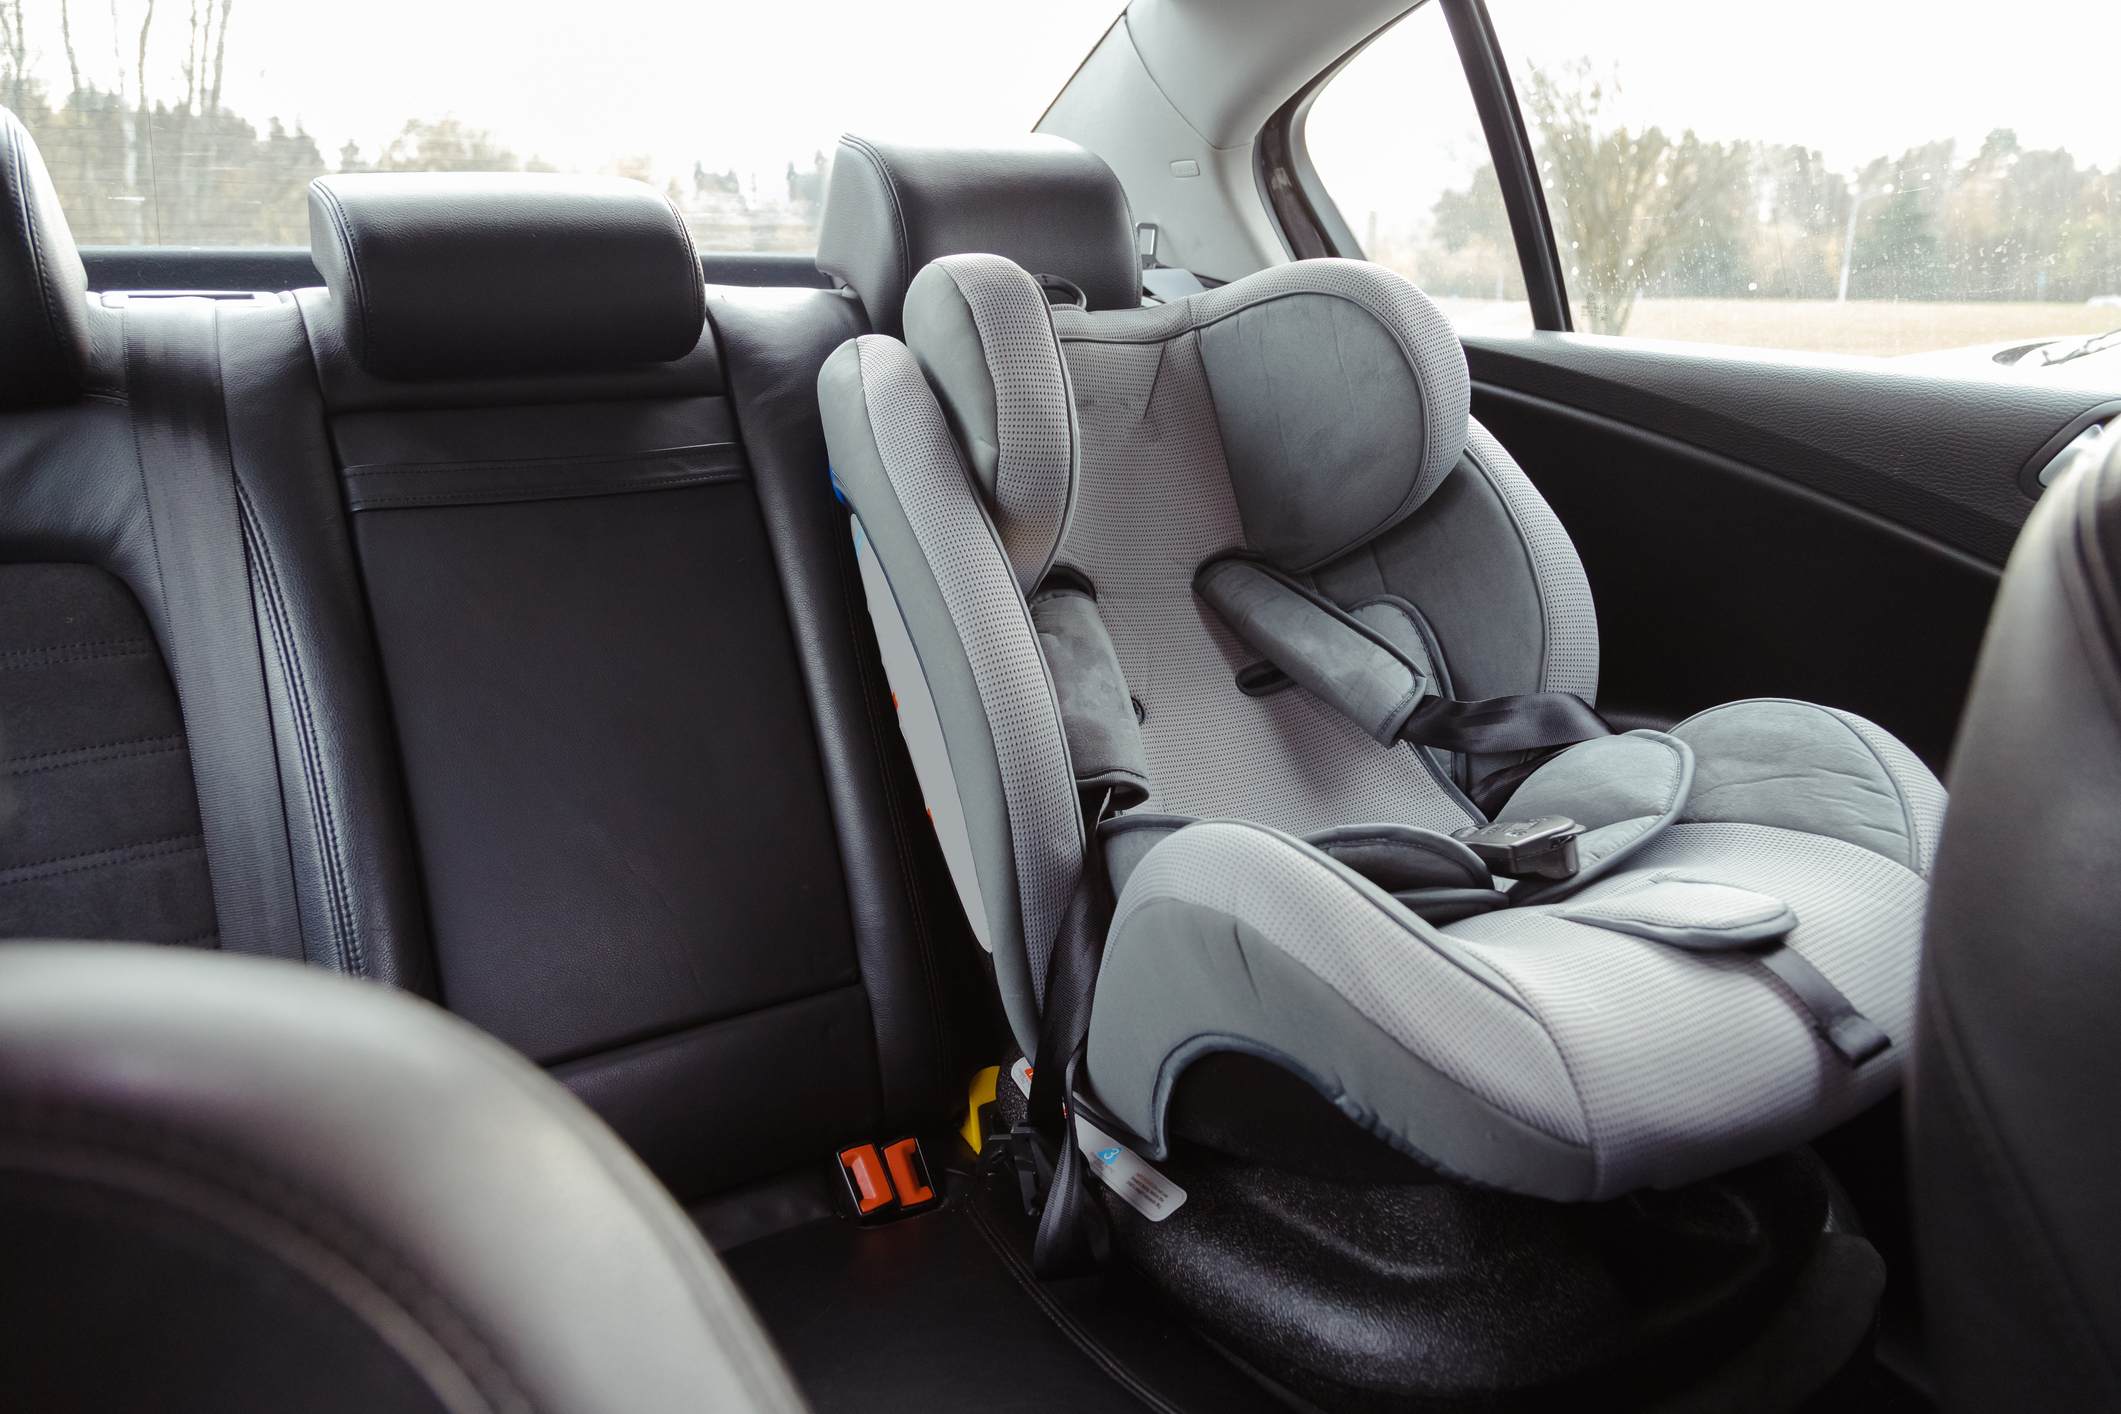 Child car seat for safety in the rear passenger seat of a car. (Photo: iStock - Vladdeep)